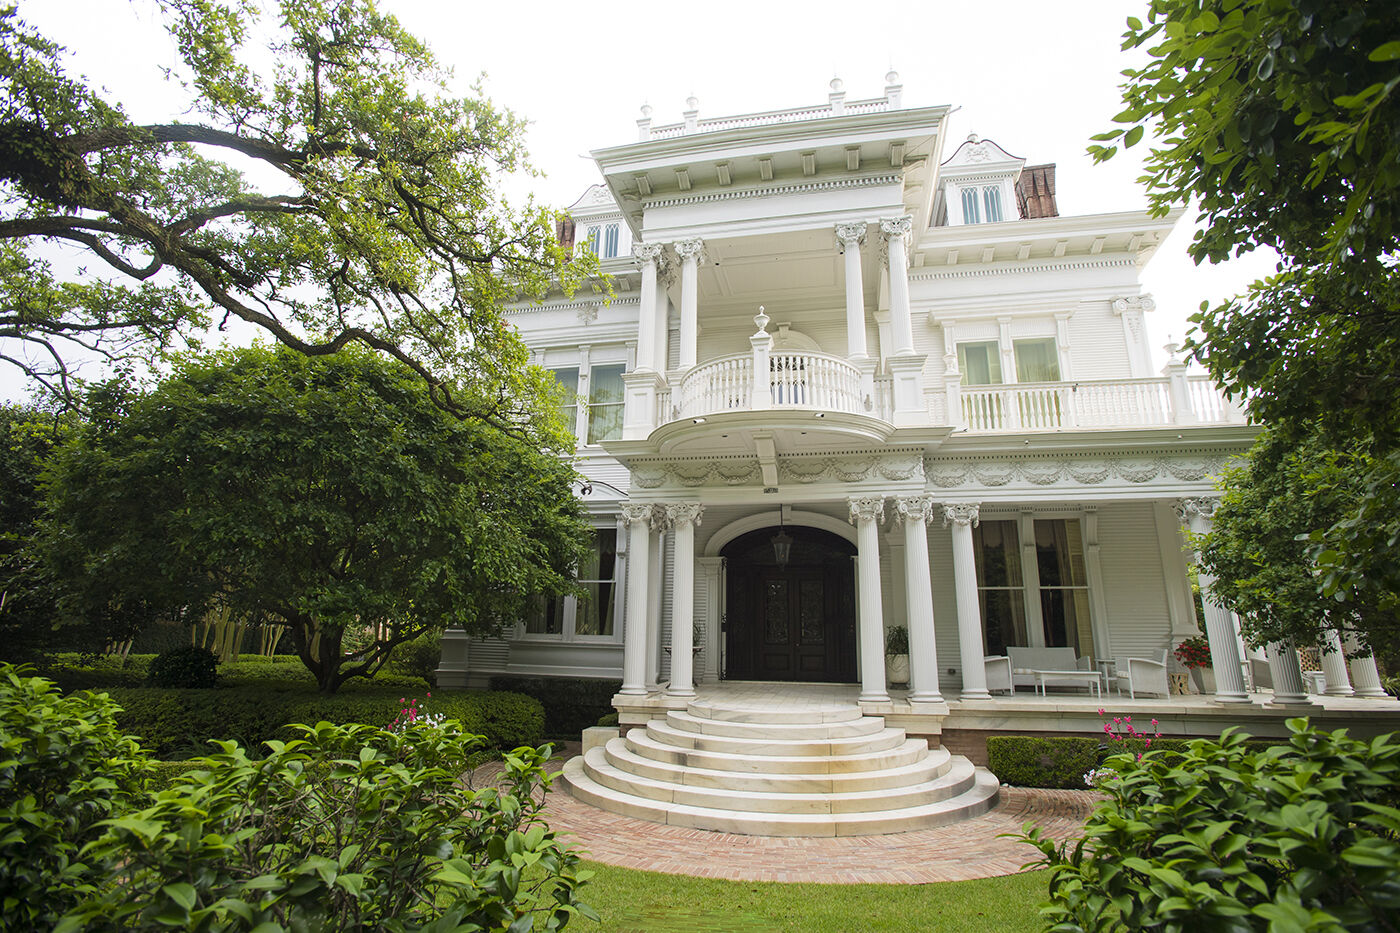 Wedding Cake House on St. Charles: a tale of old New Orleans